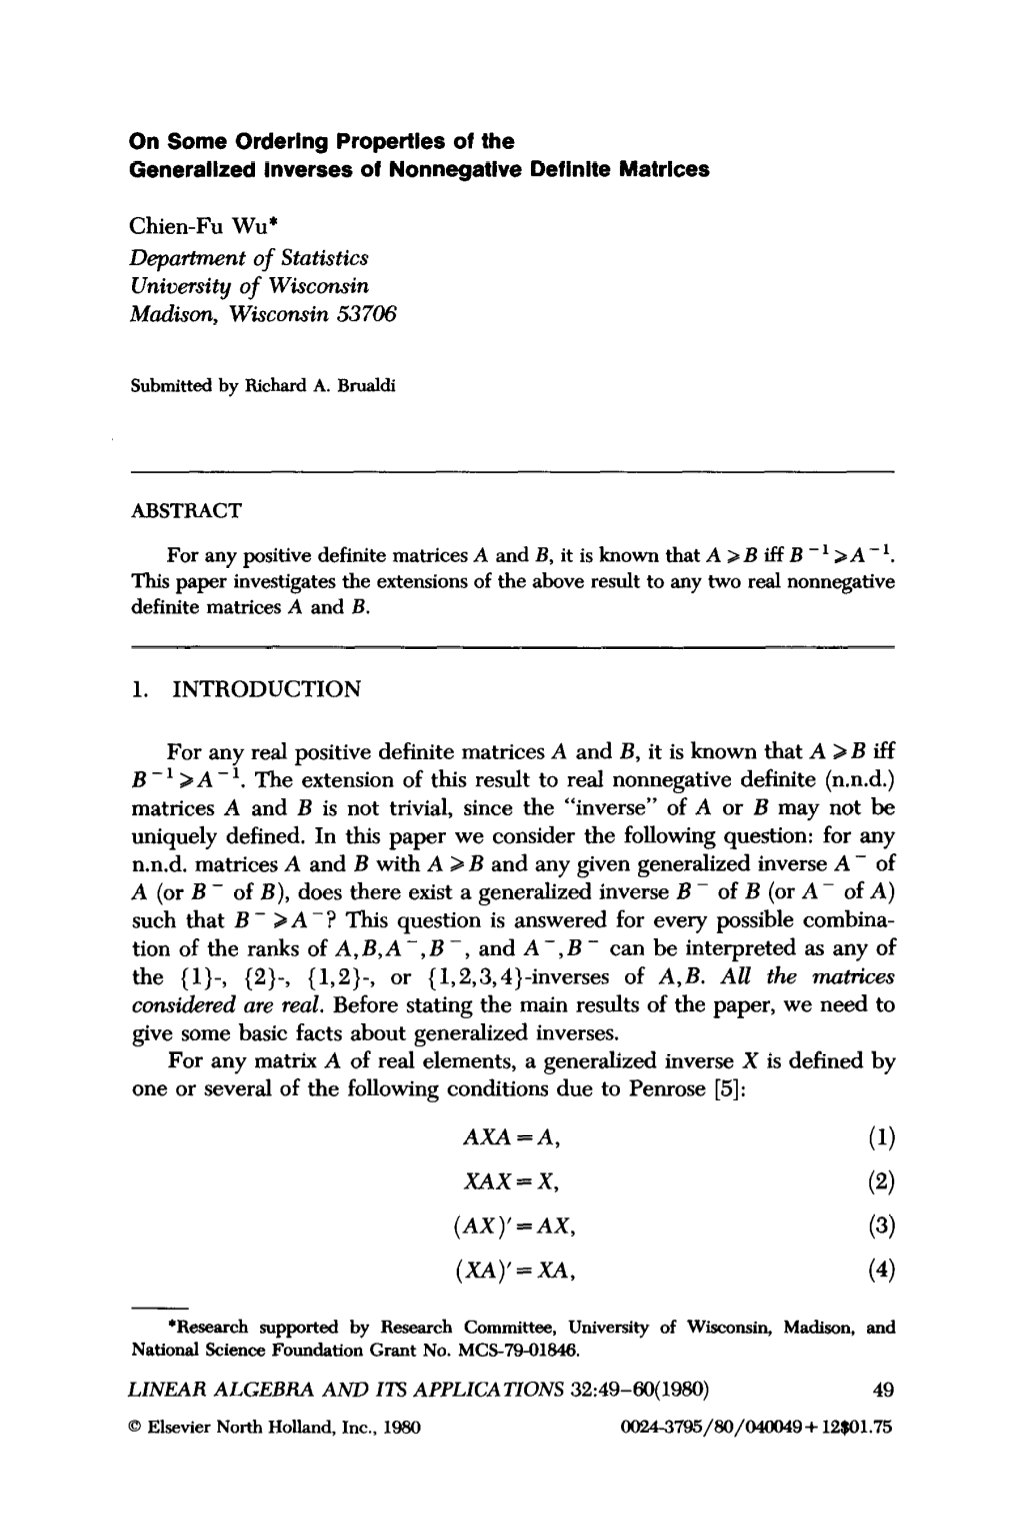 On Some Ordering Properties of the Generalized Inverses of Nonnegative Definite Matrices